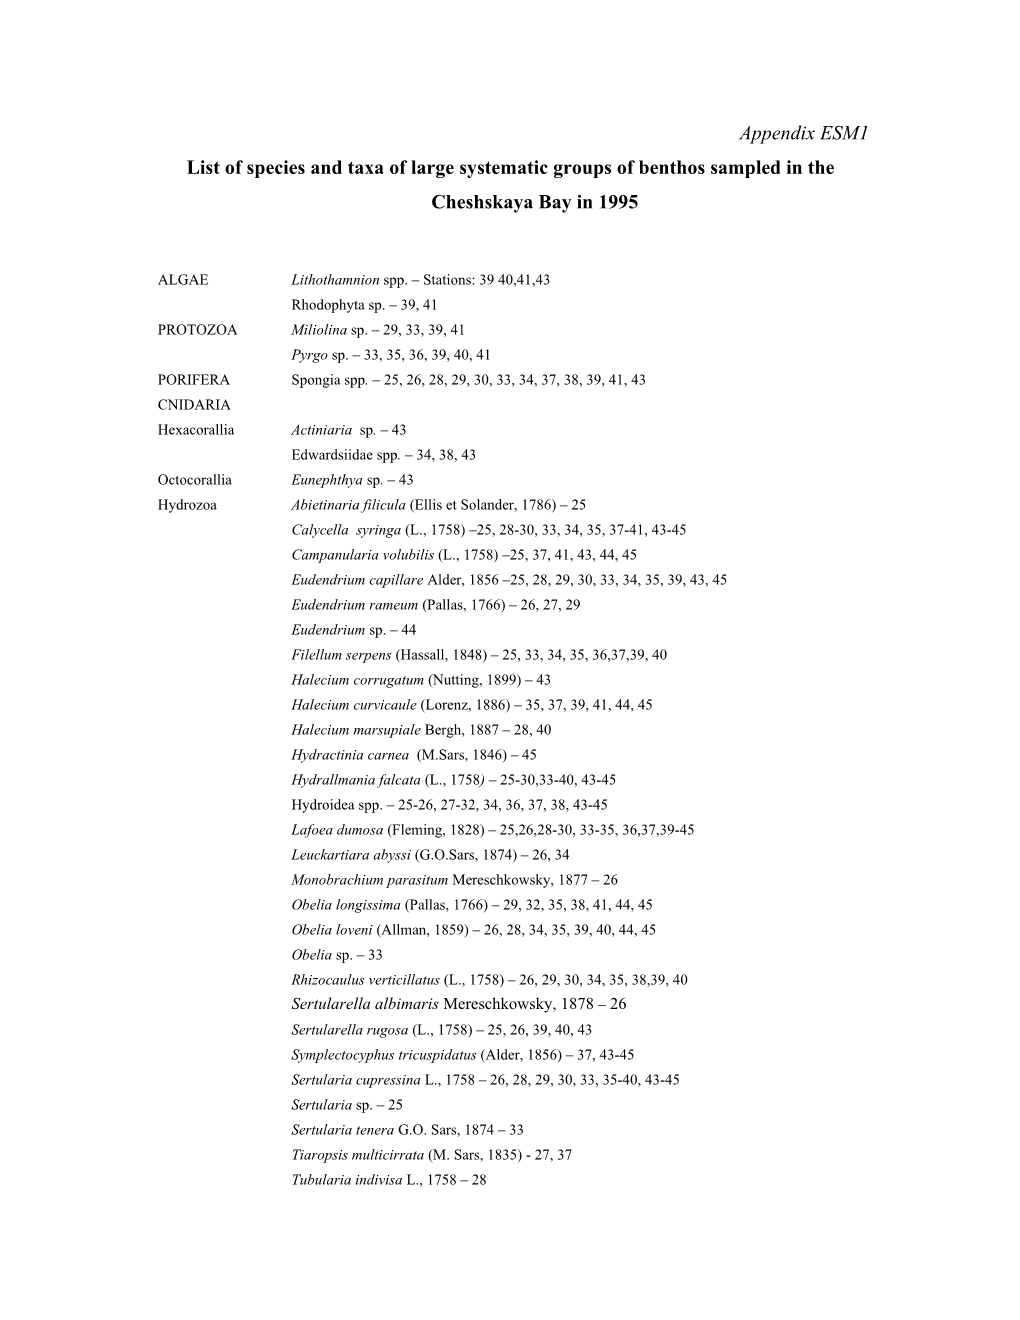 List of Species and Taxa of Large Systematic Groups of Benthos Sampled in the Cheshskaya